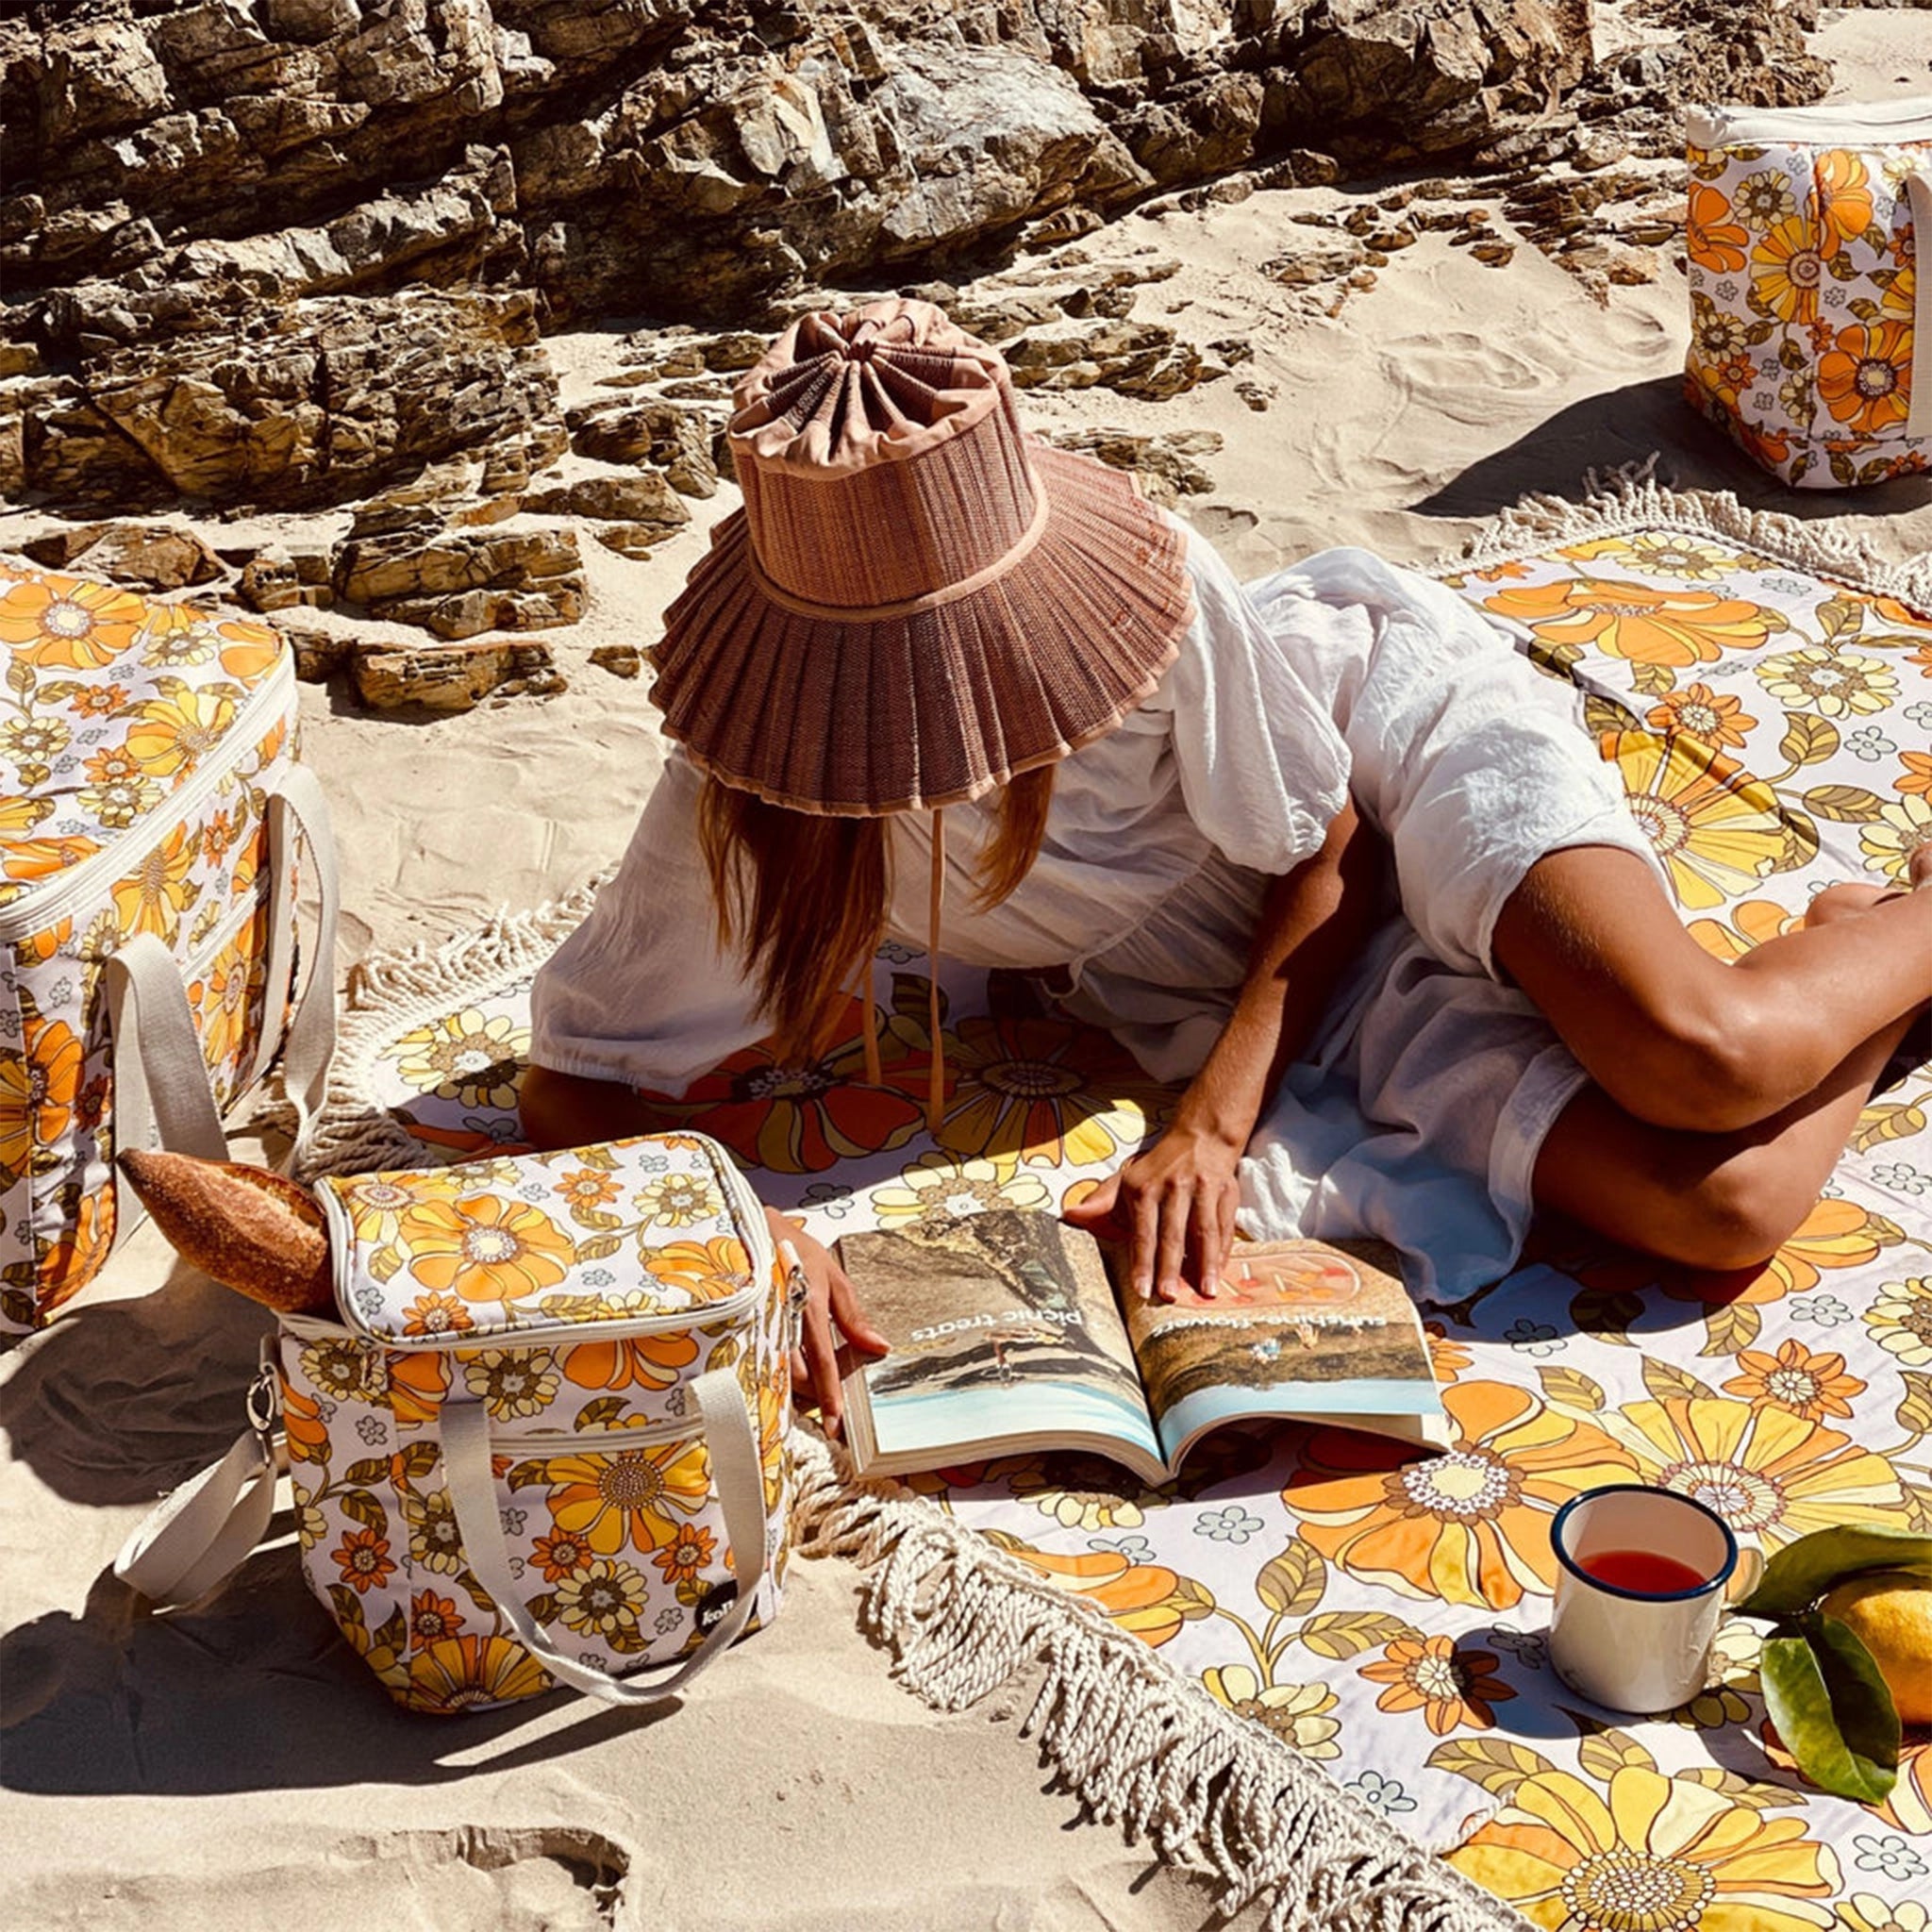 A 70's style yellow and orange floral picnic mat with cream fringe detailing around the edges photographed with coolers and beach bags in the same print with a model laying on it reading a book.